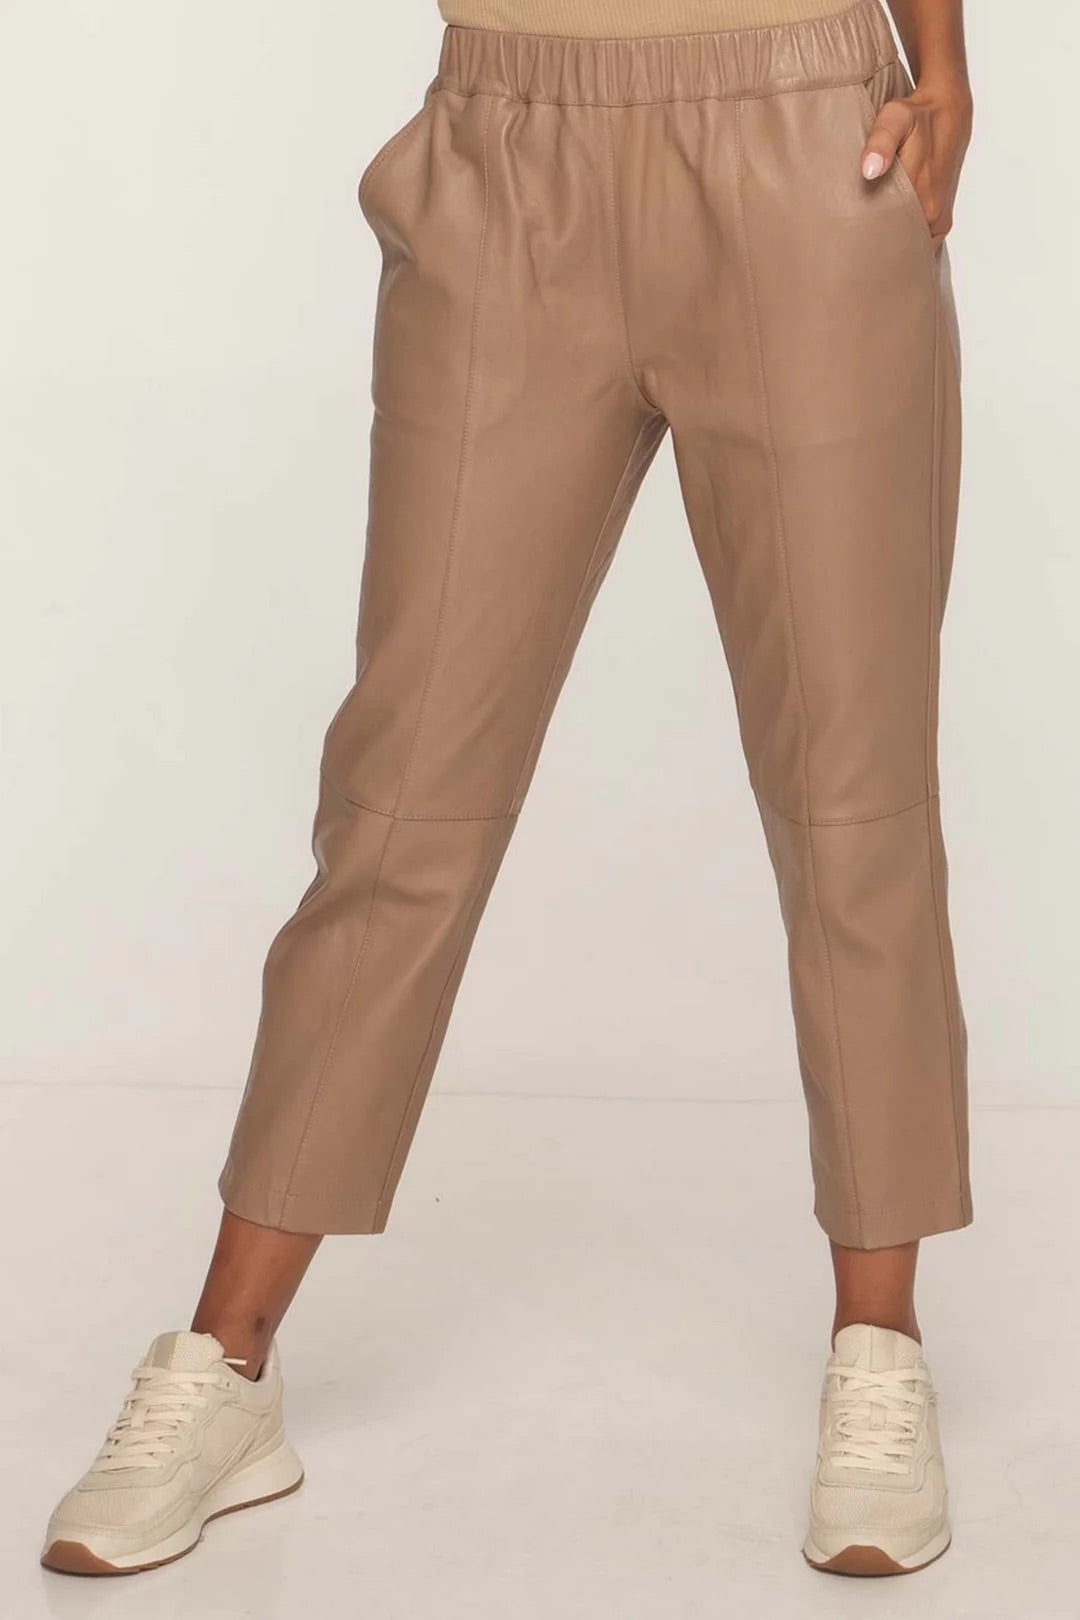 2nd Skin - Bianca Leather Jogger